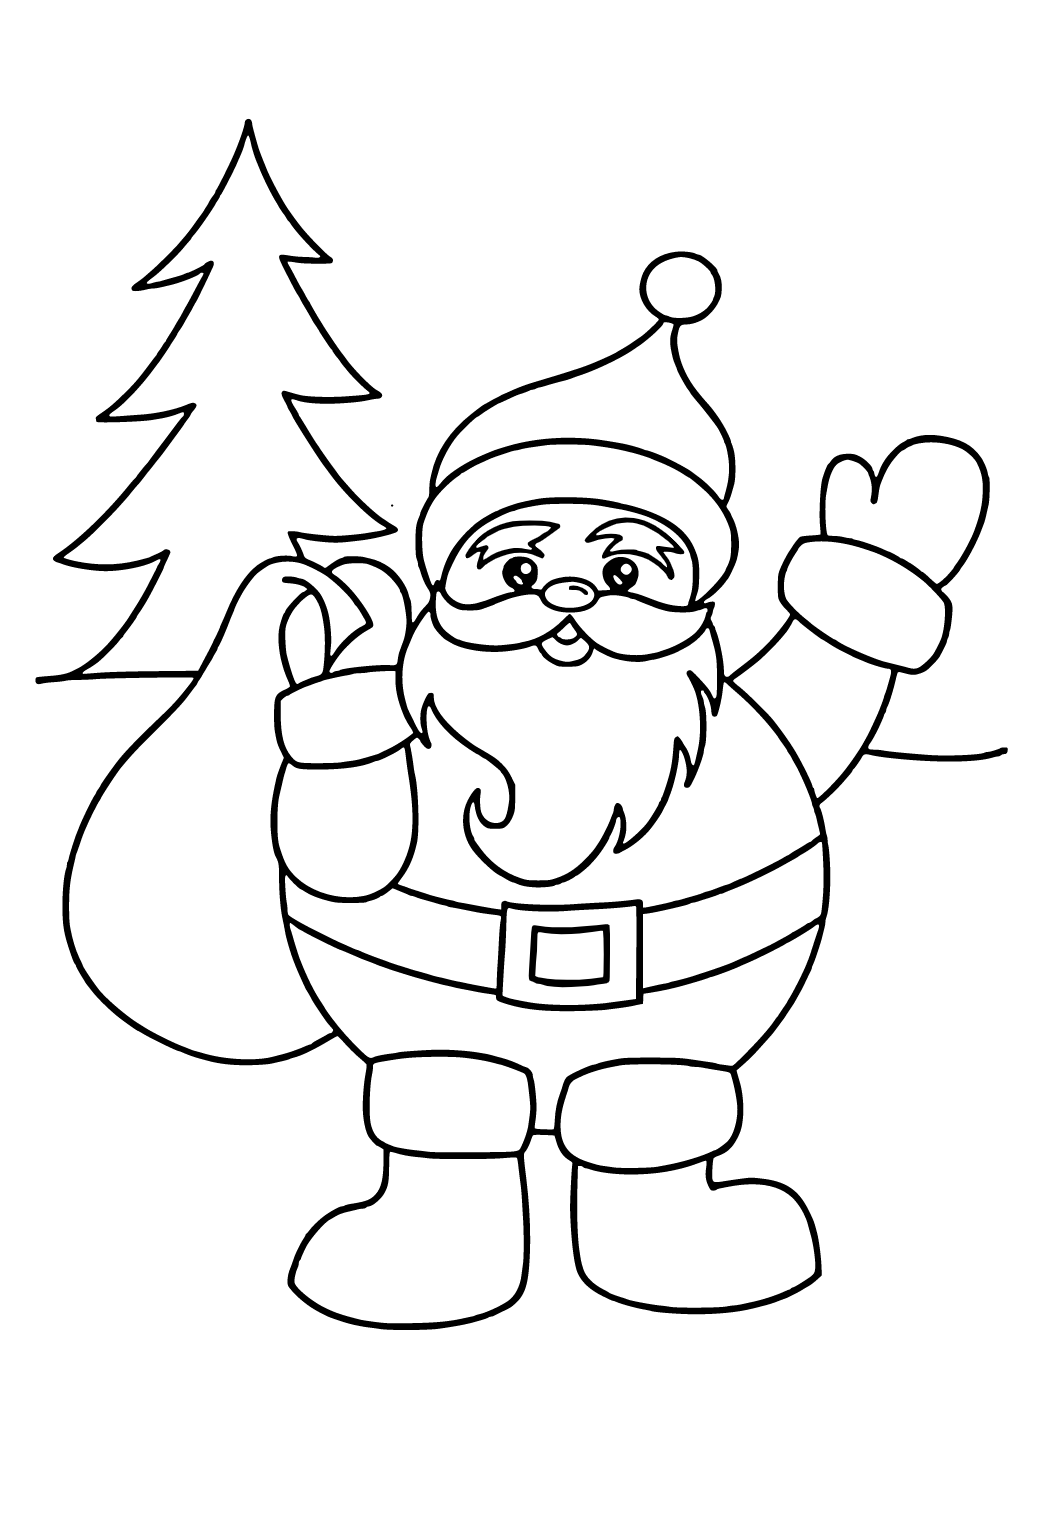 Free Printable Santa Claus Easy Coloring Page for Adults and Kids ...